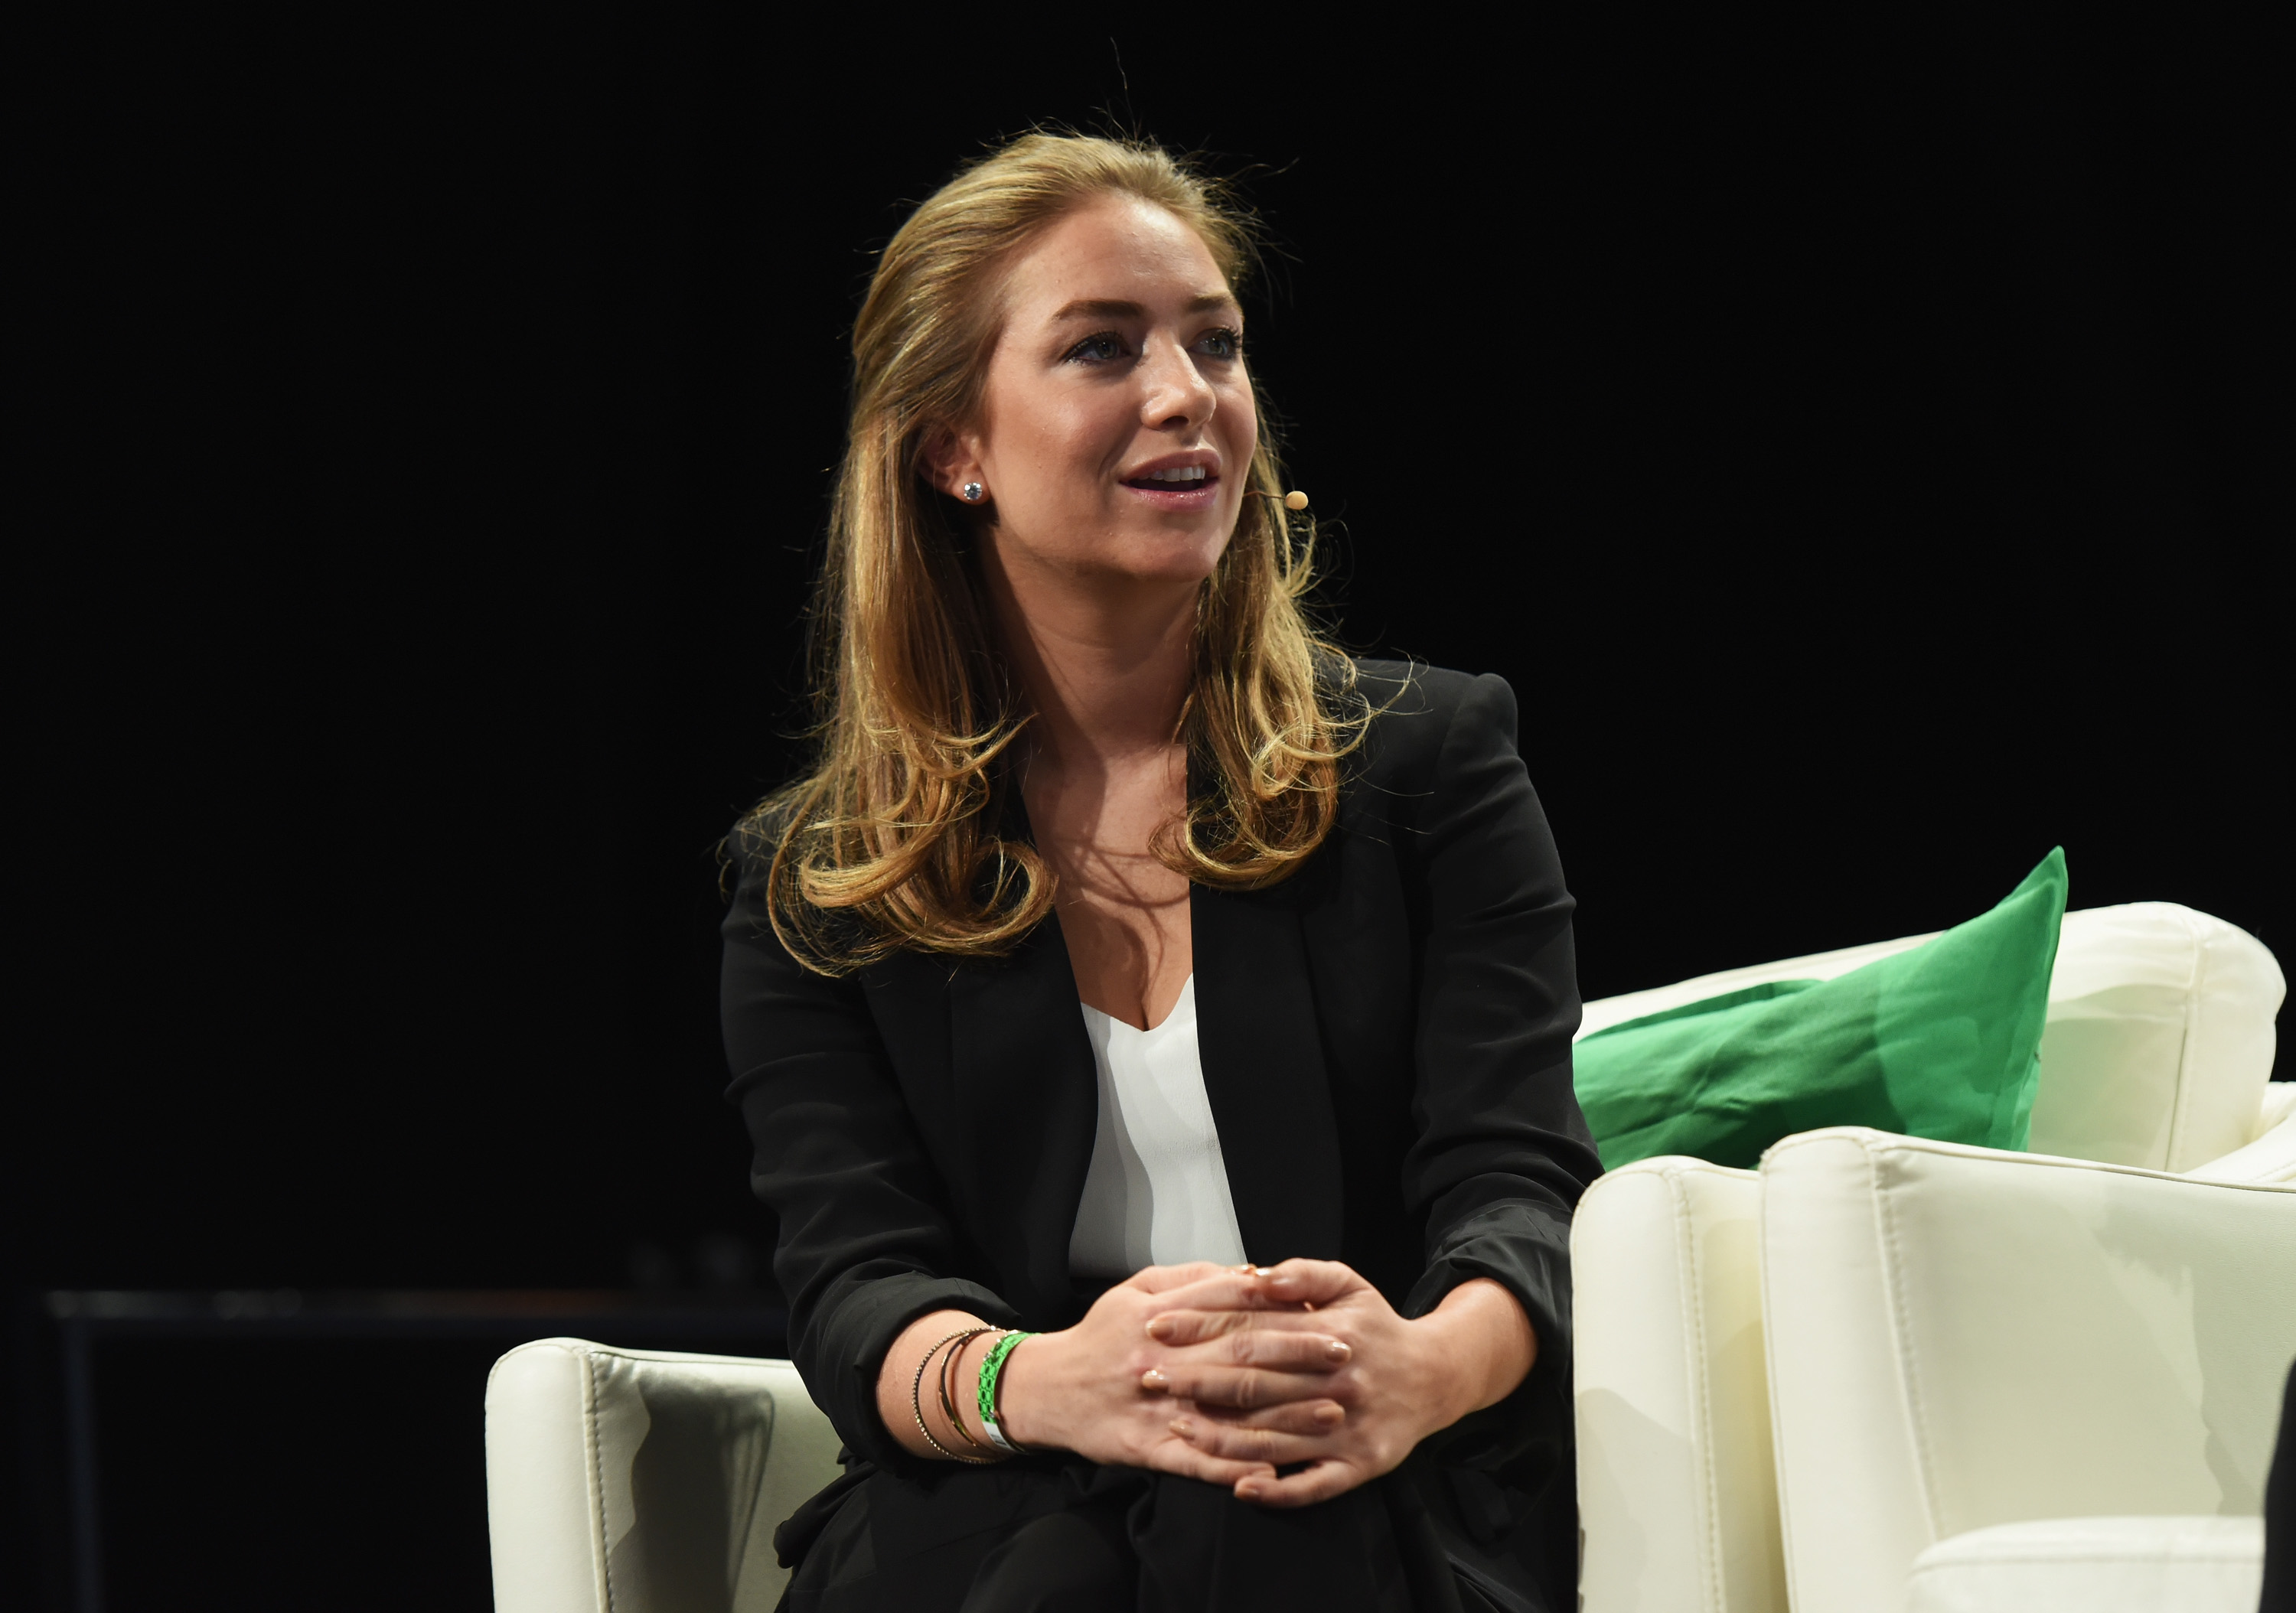 NEW YORK, NY - MAY 11:  Co-founder and CEO of Bumble Whitney Wolfe speaks onstage during TechCrunch Disrupt NY 2016 at Brooklyn Cruise Terminal on May 11, 2016 in New York City.  (Photo by Noam Galai/Getty Images for TechCrunch) (Noam Galai—Getty Images for TechCrunch)